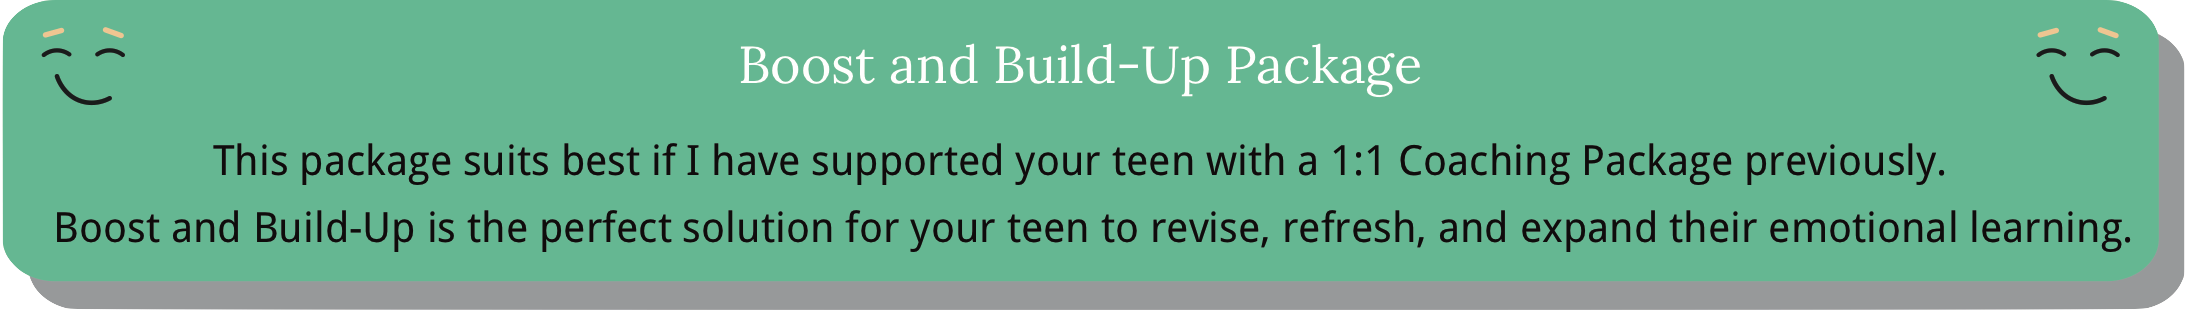 Boost and Build-up package for teens.